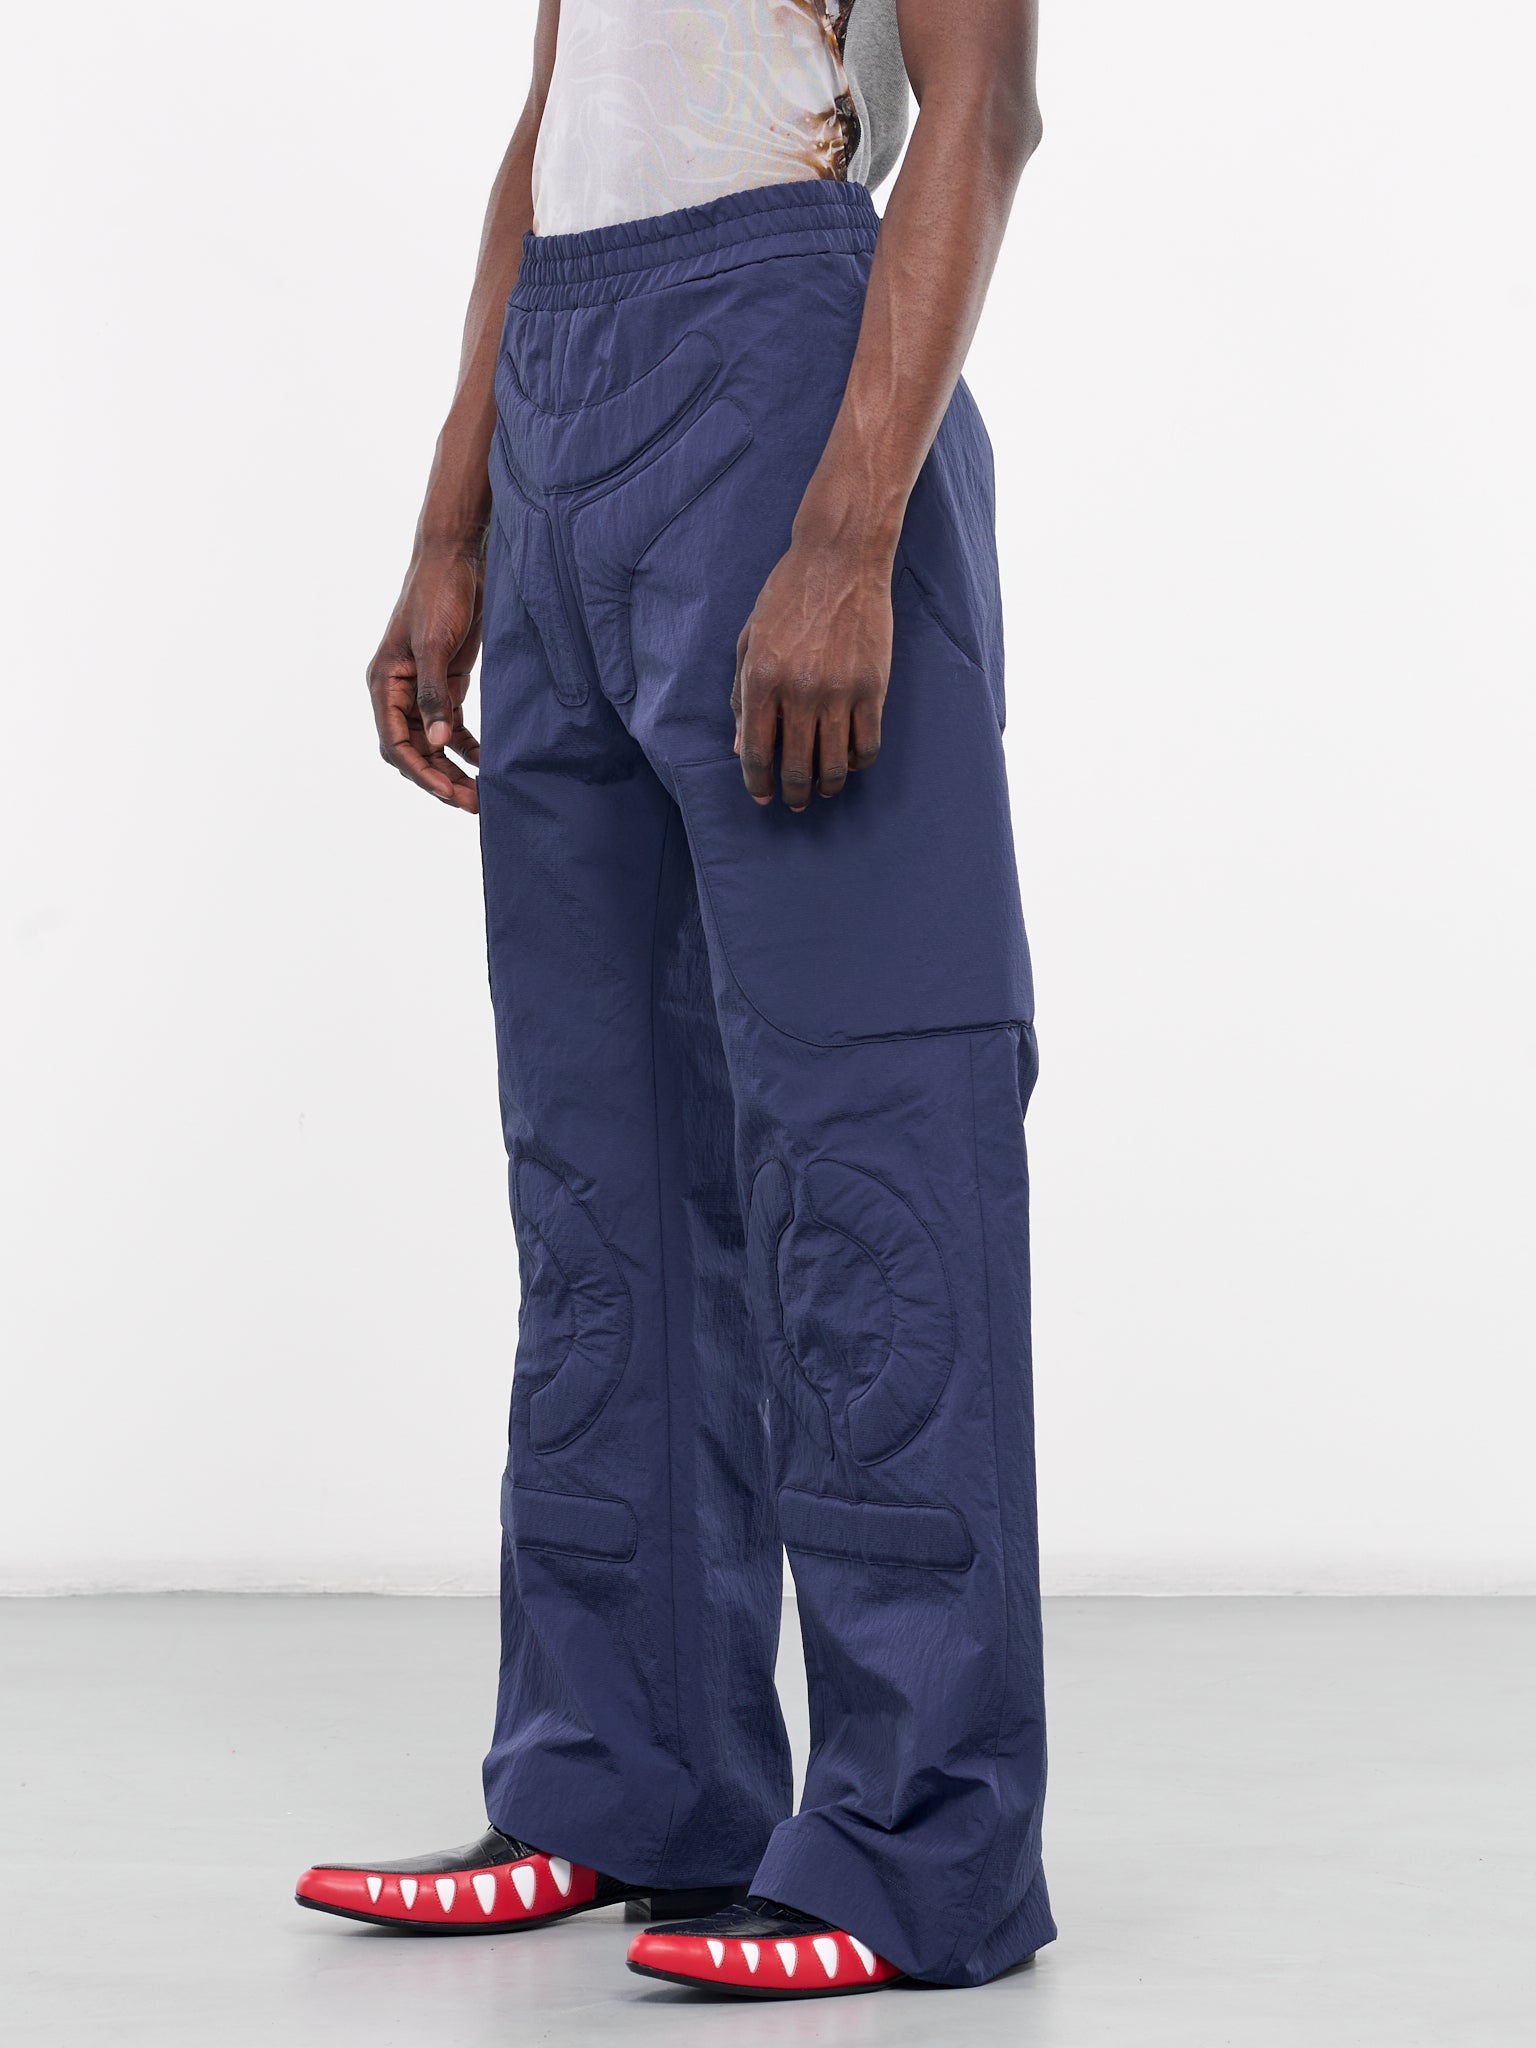 Space Pants (2007-SPACE-CC19-NAVY)